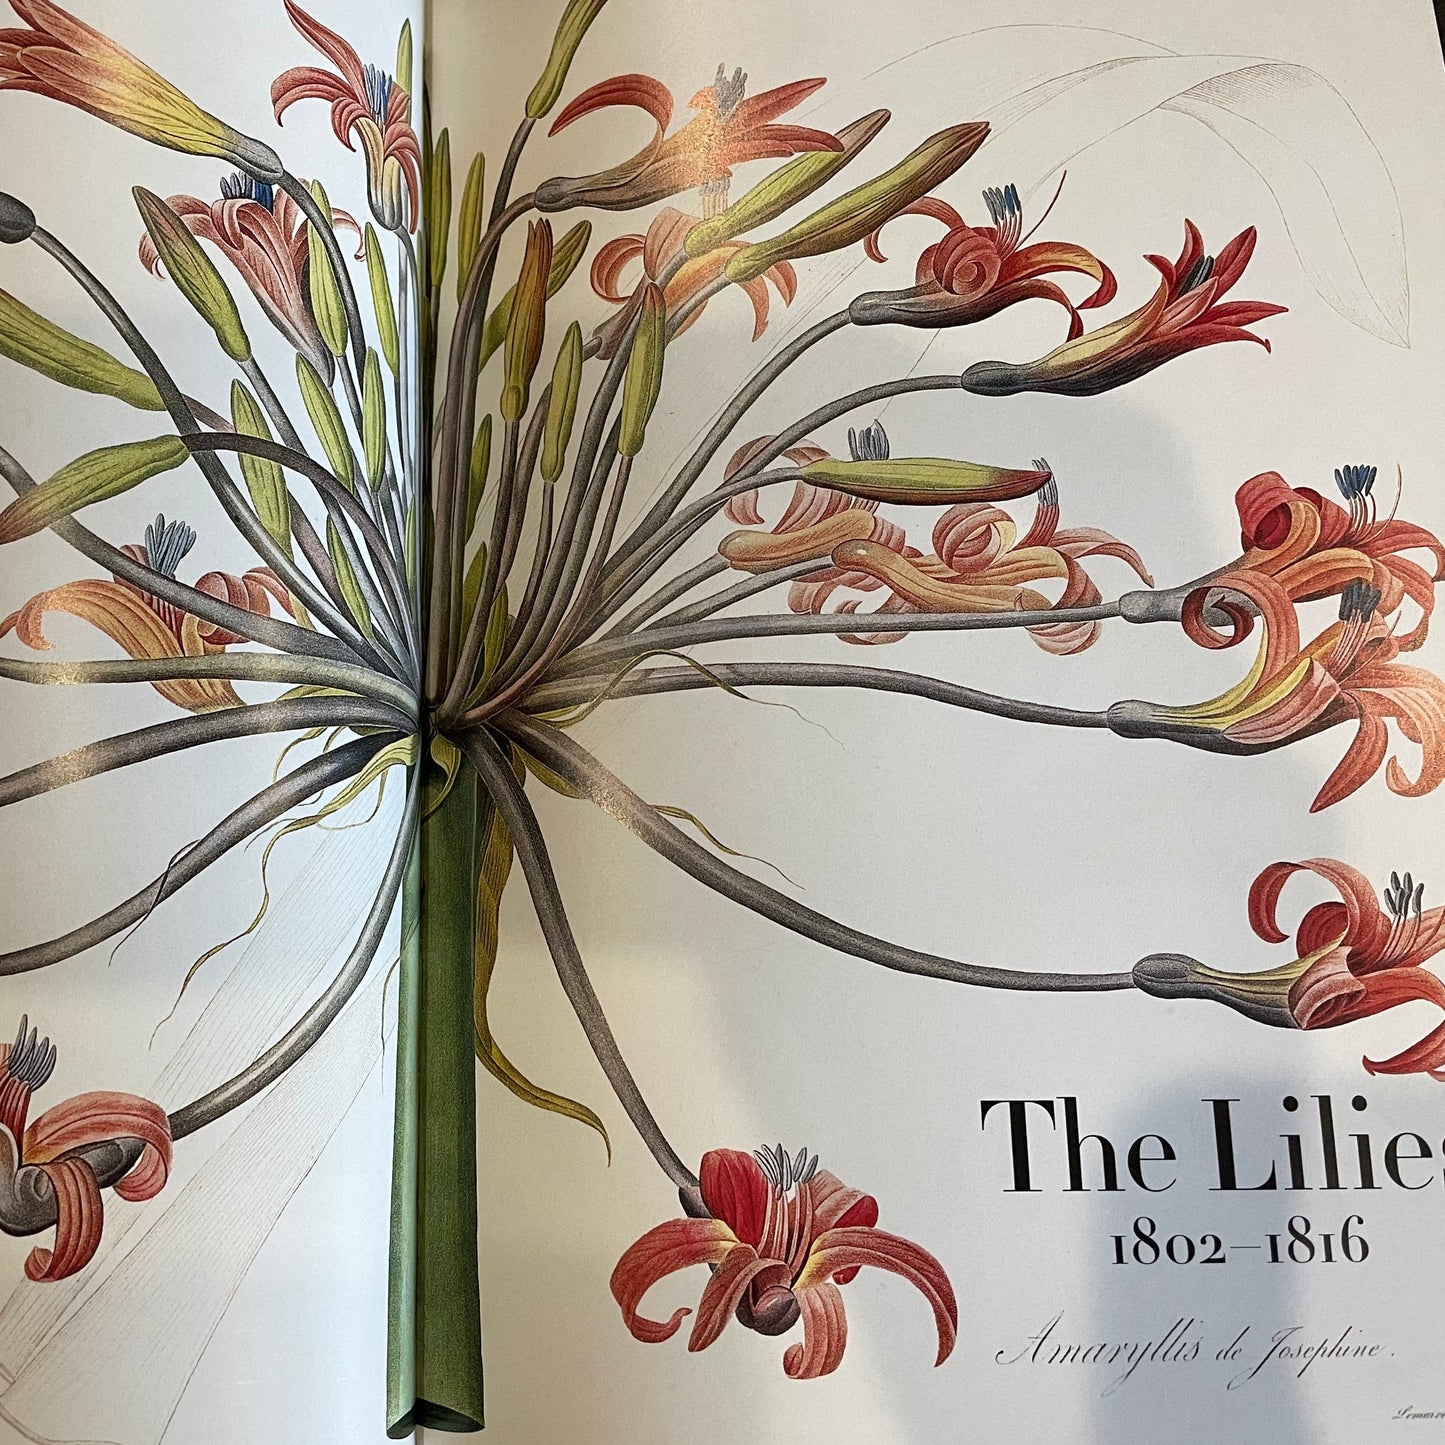 One of the chapters of the book is call the Lilies  1802-1816 